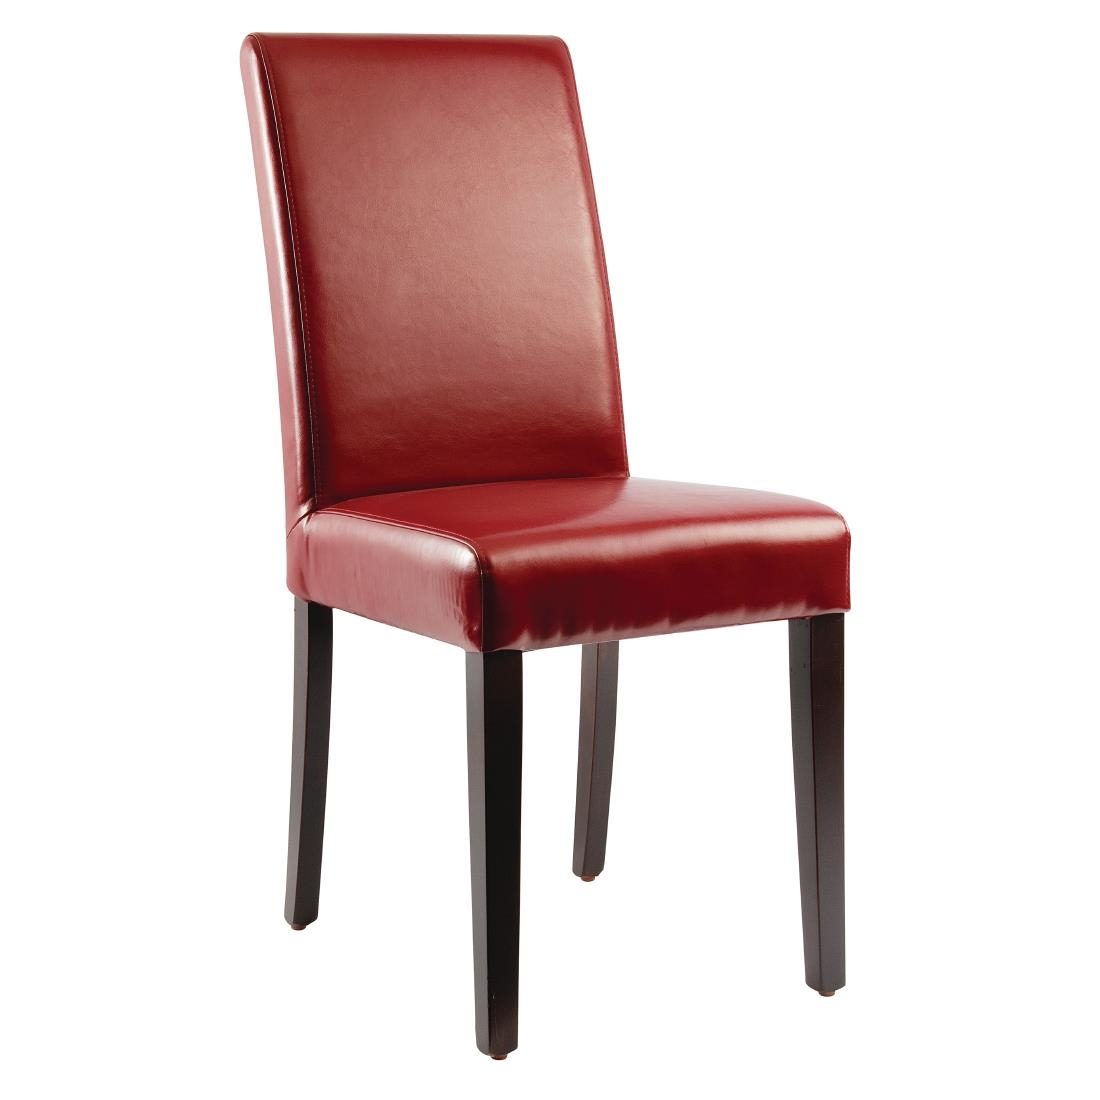 Faux Leather Dining Chair - Red